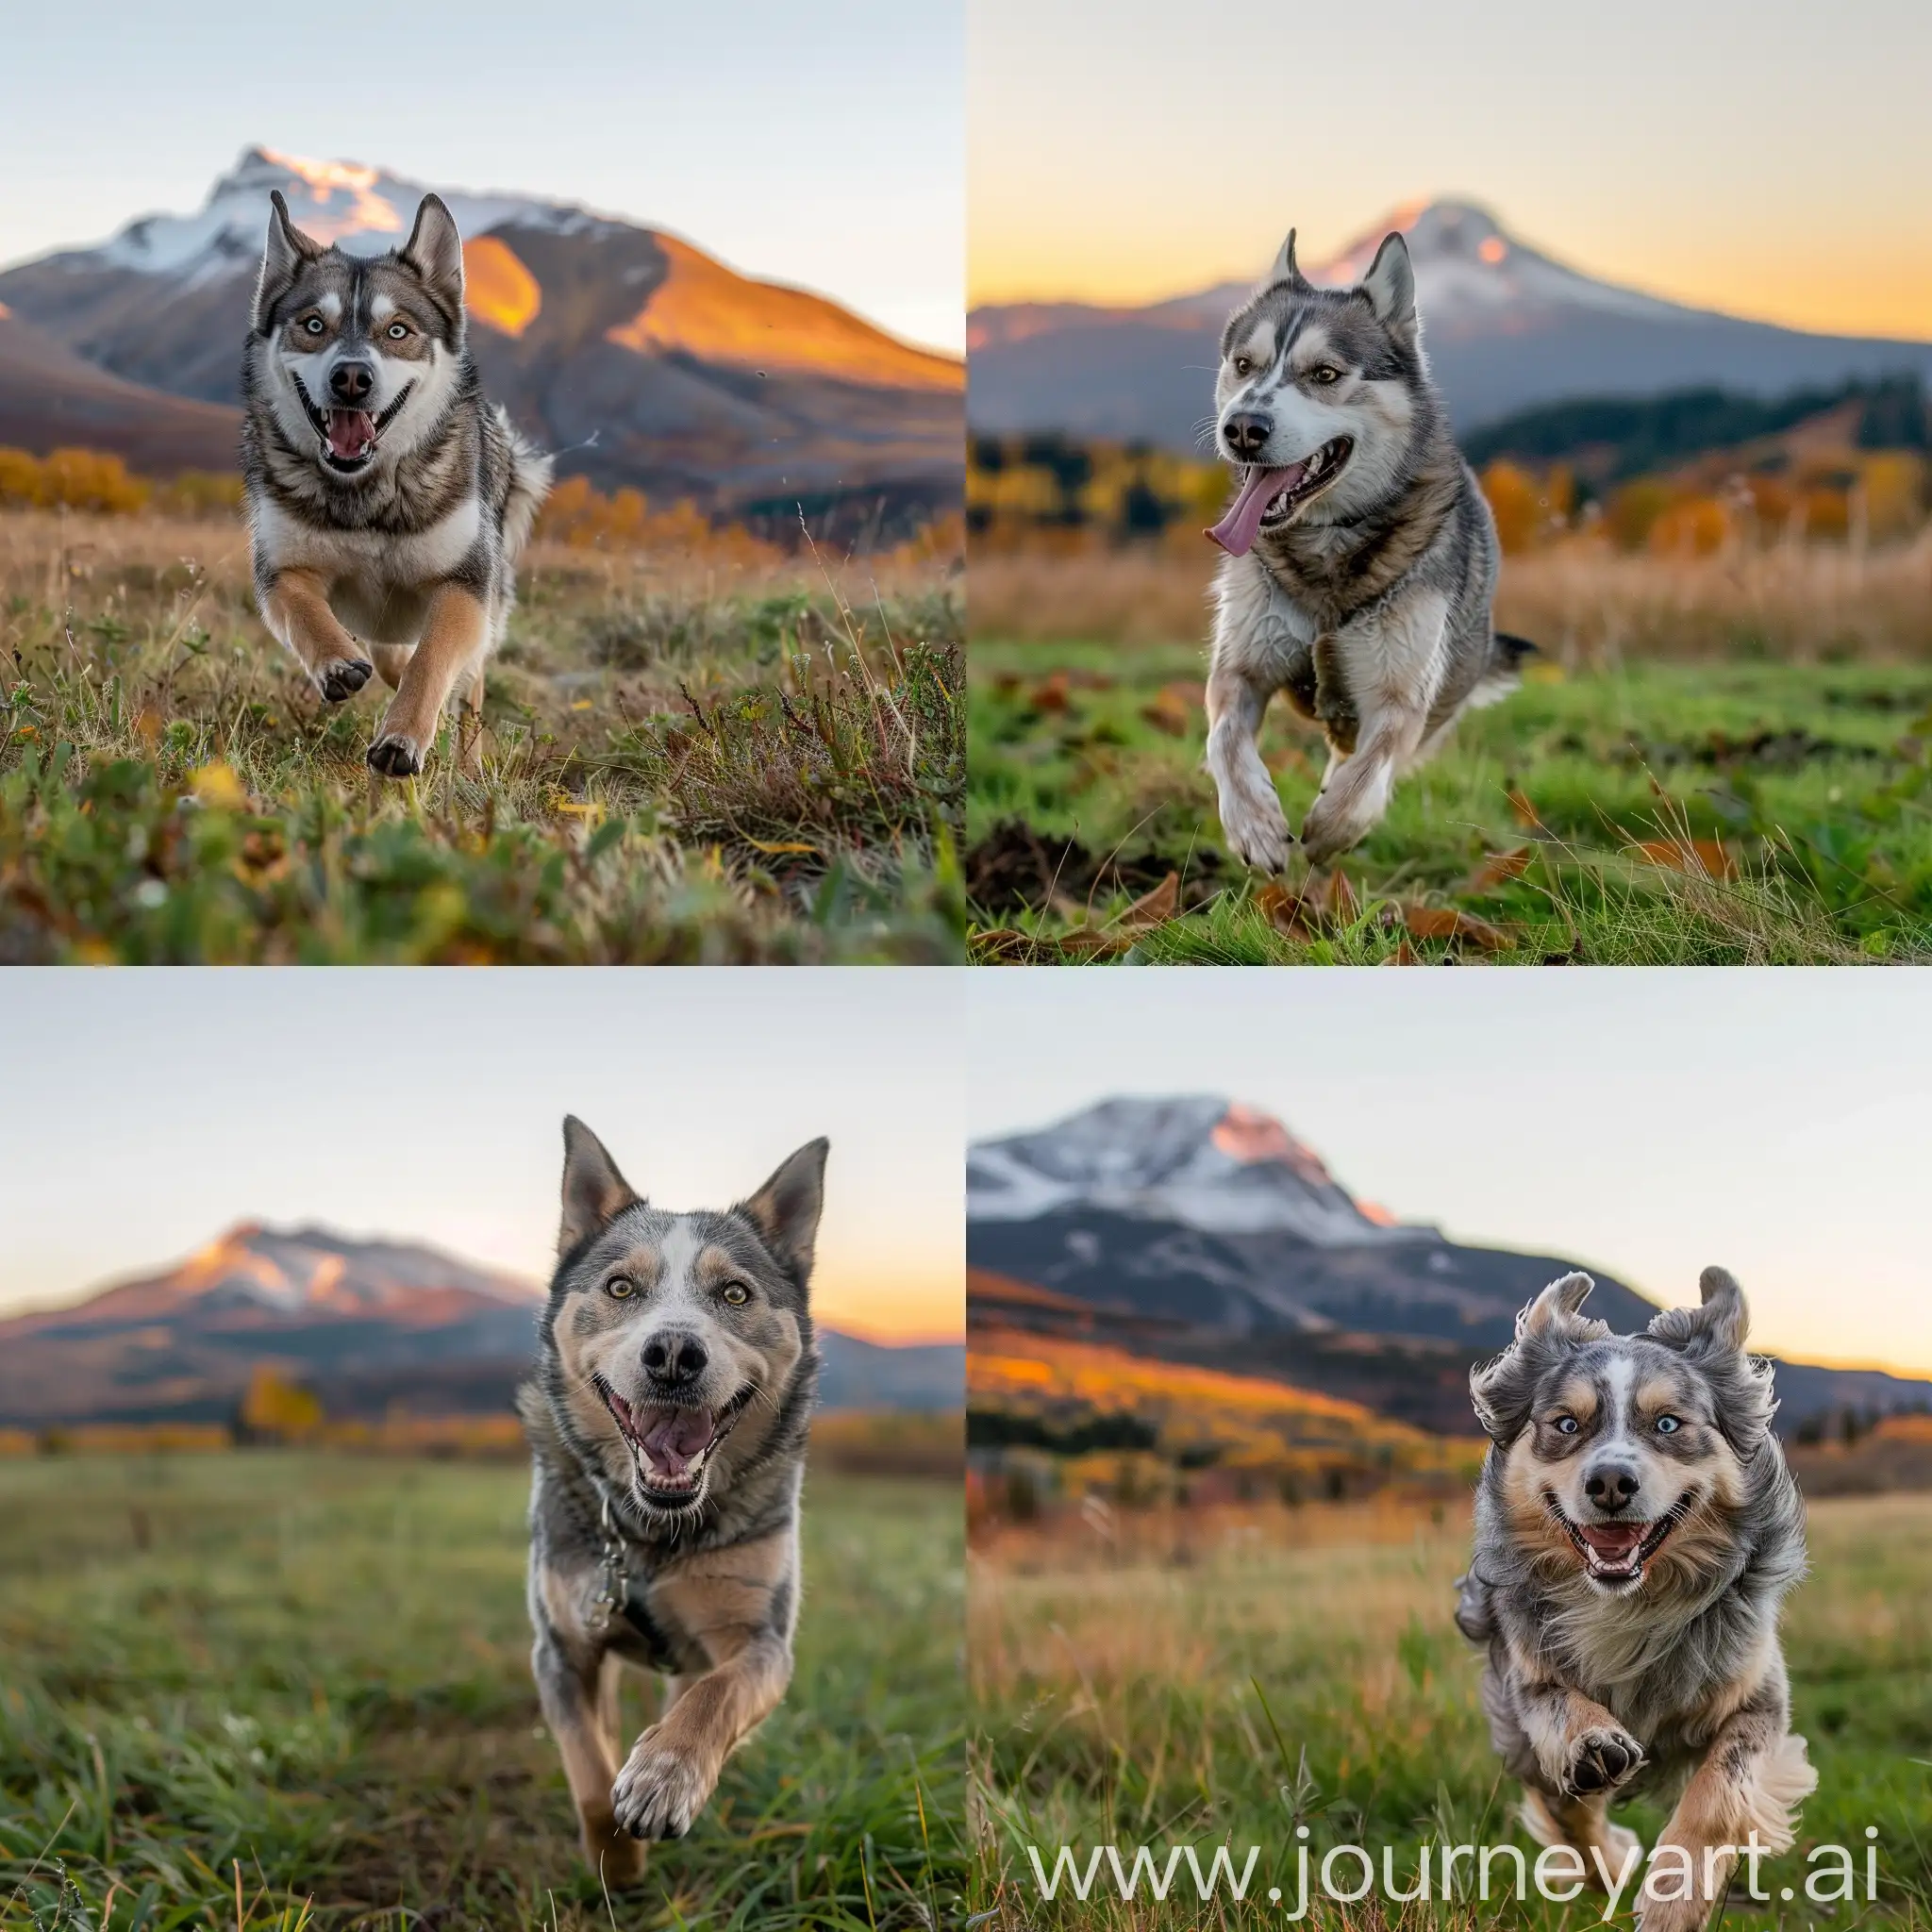 Energetic-Autumn-Run-Joyful-Gray-and-Brown-Husky-in-a-Meadow-with-Snowy-Mountain-View